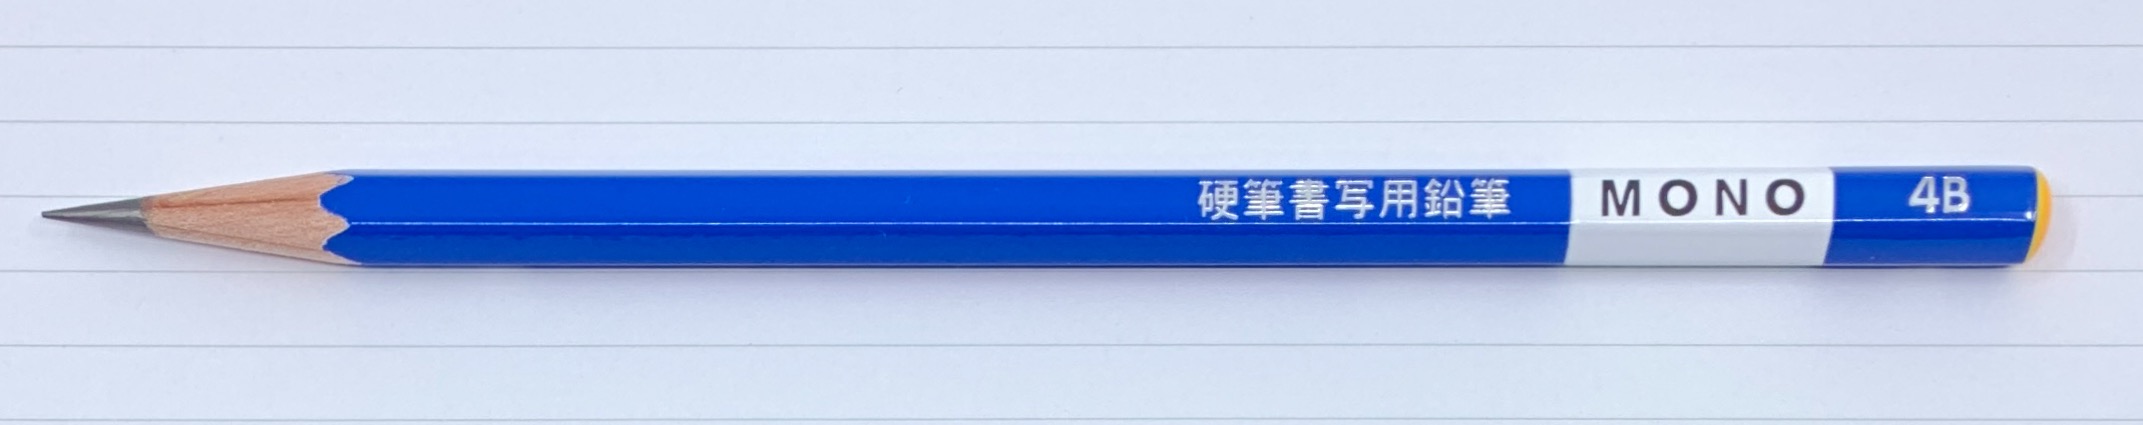 Japanese Pencil Comparison: Mitsubishi and Tombow - The Well